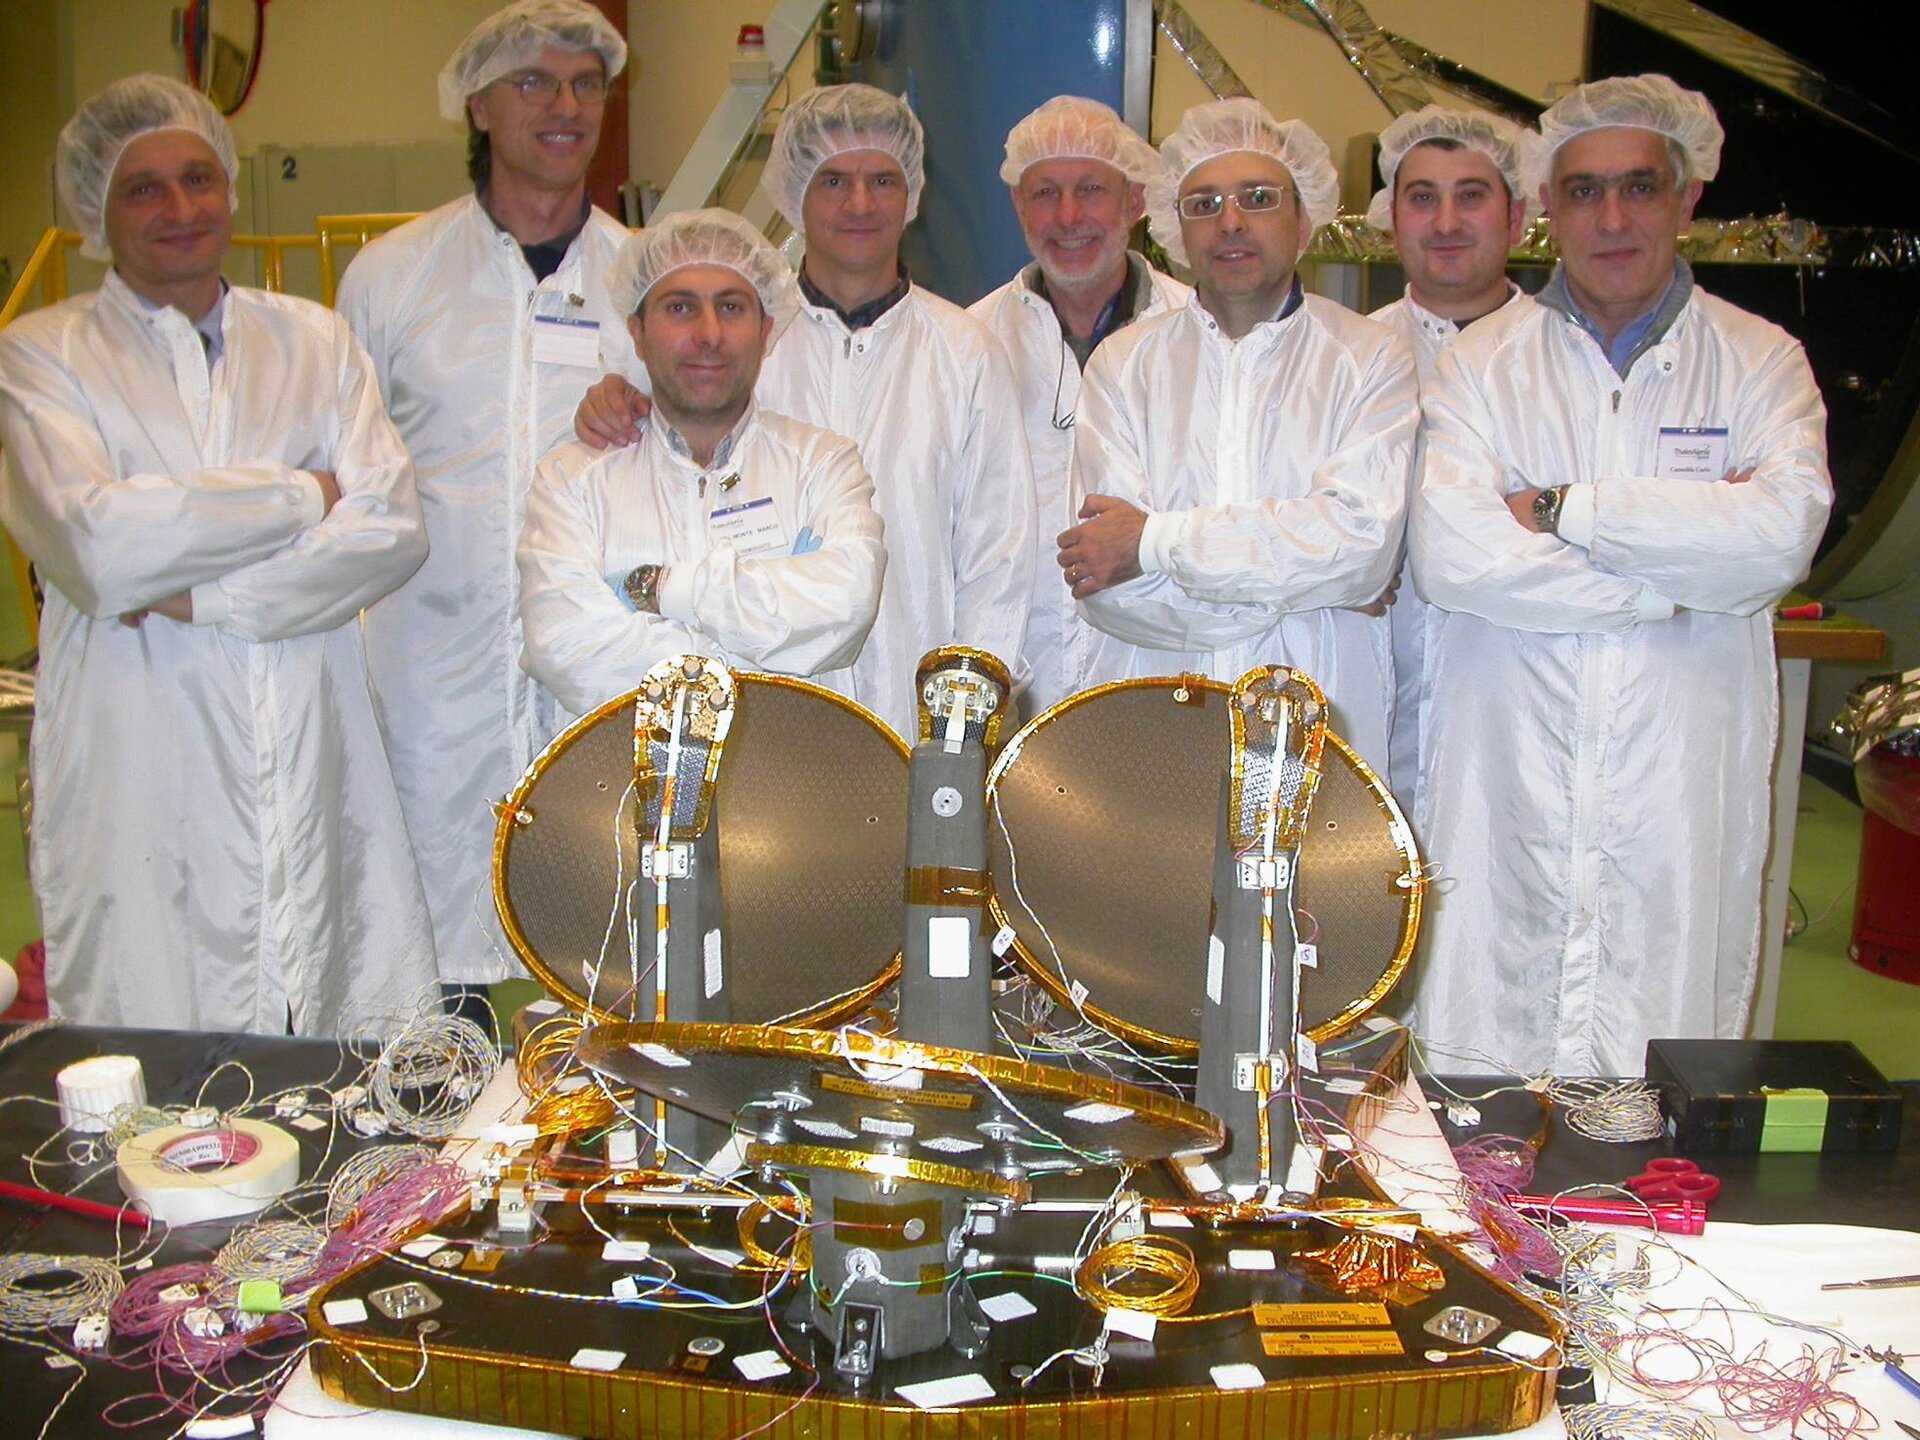 The Q/V-band communication payload team